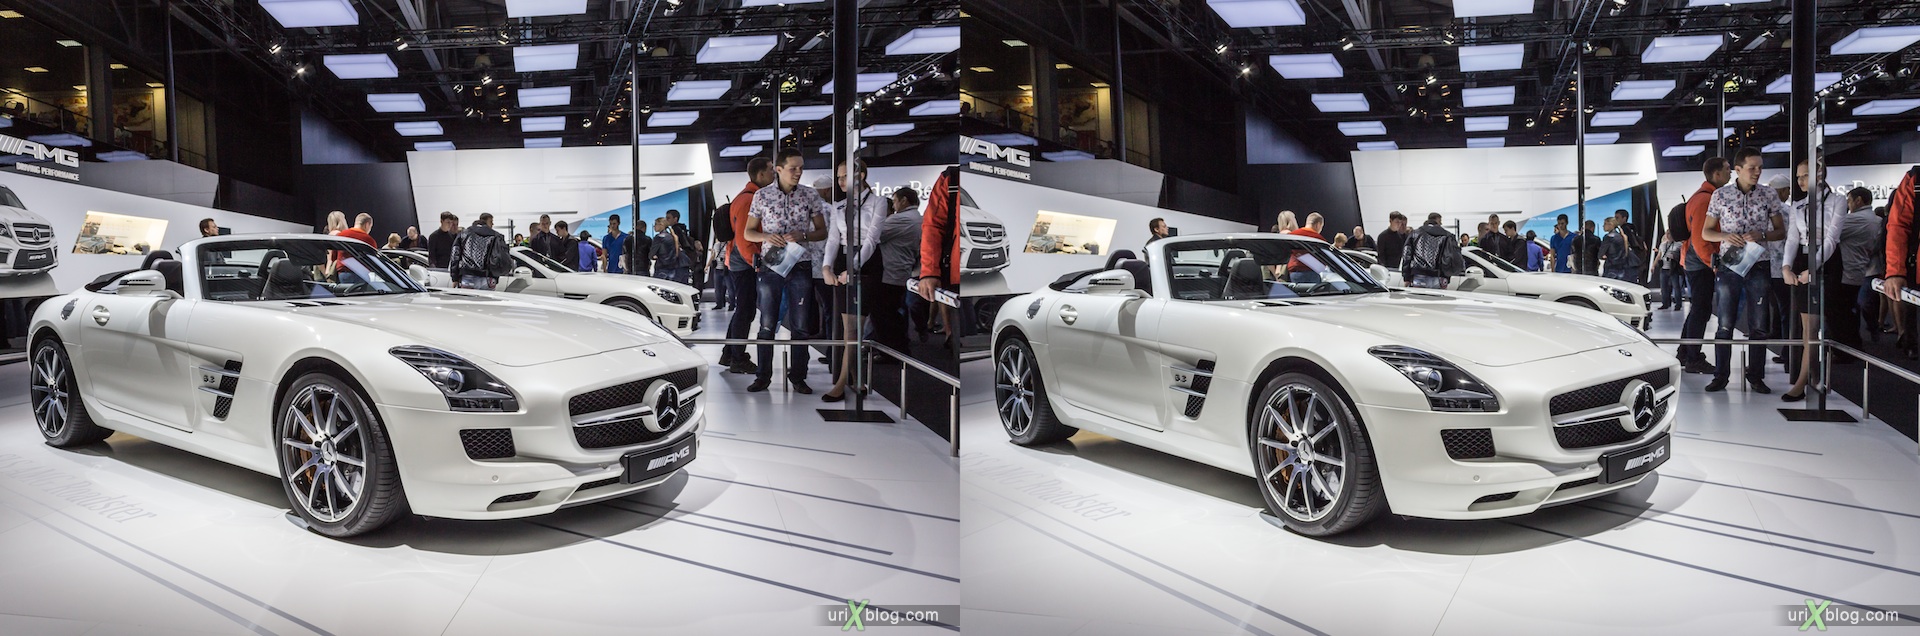 2012, Mercedes Benz AMG, Moscow International Automobile Salon, auto show, 3D, stereo pair, cross-eyed, crossview